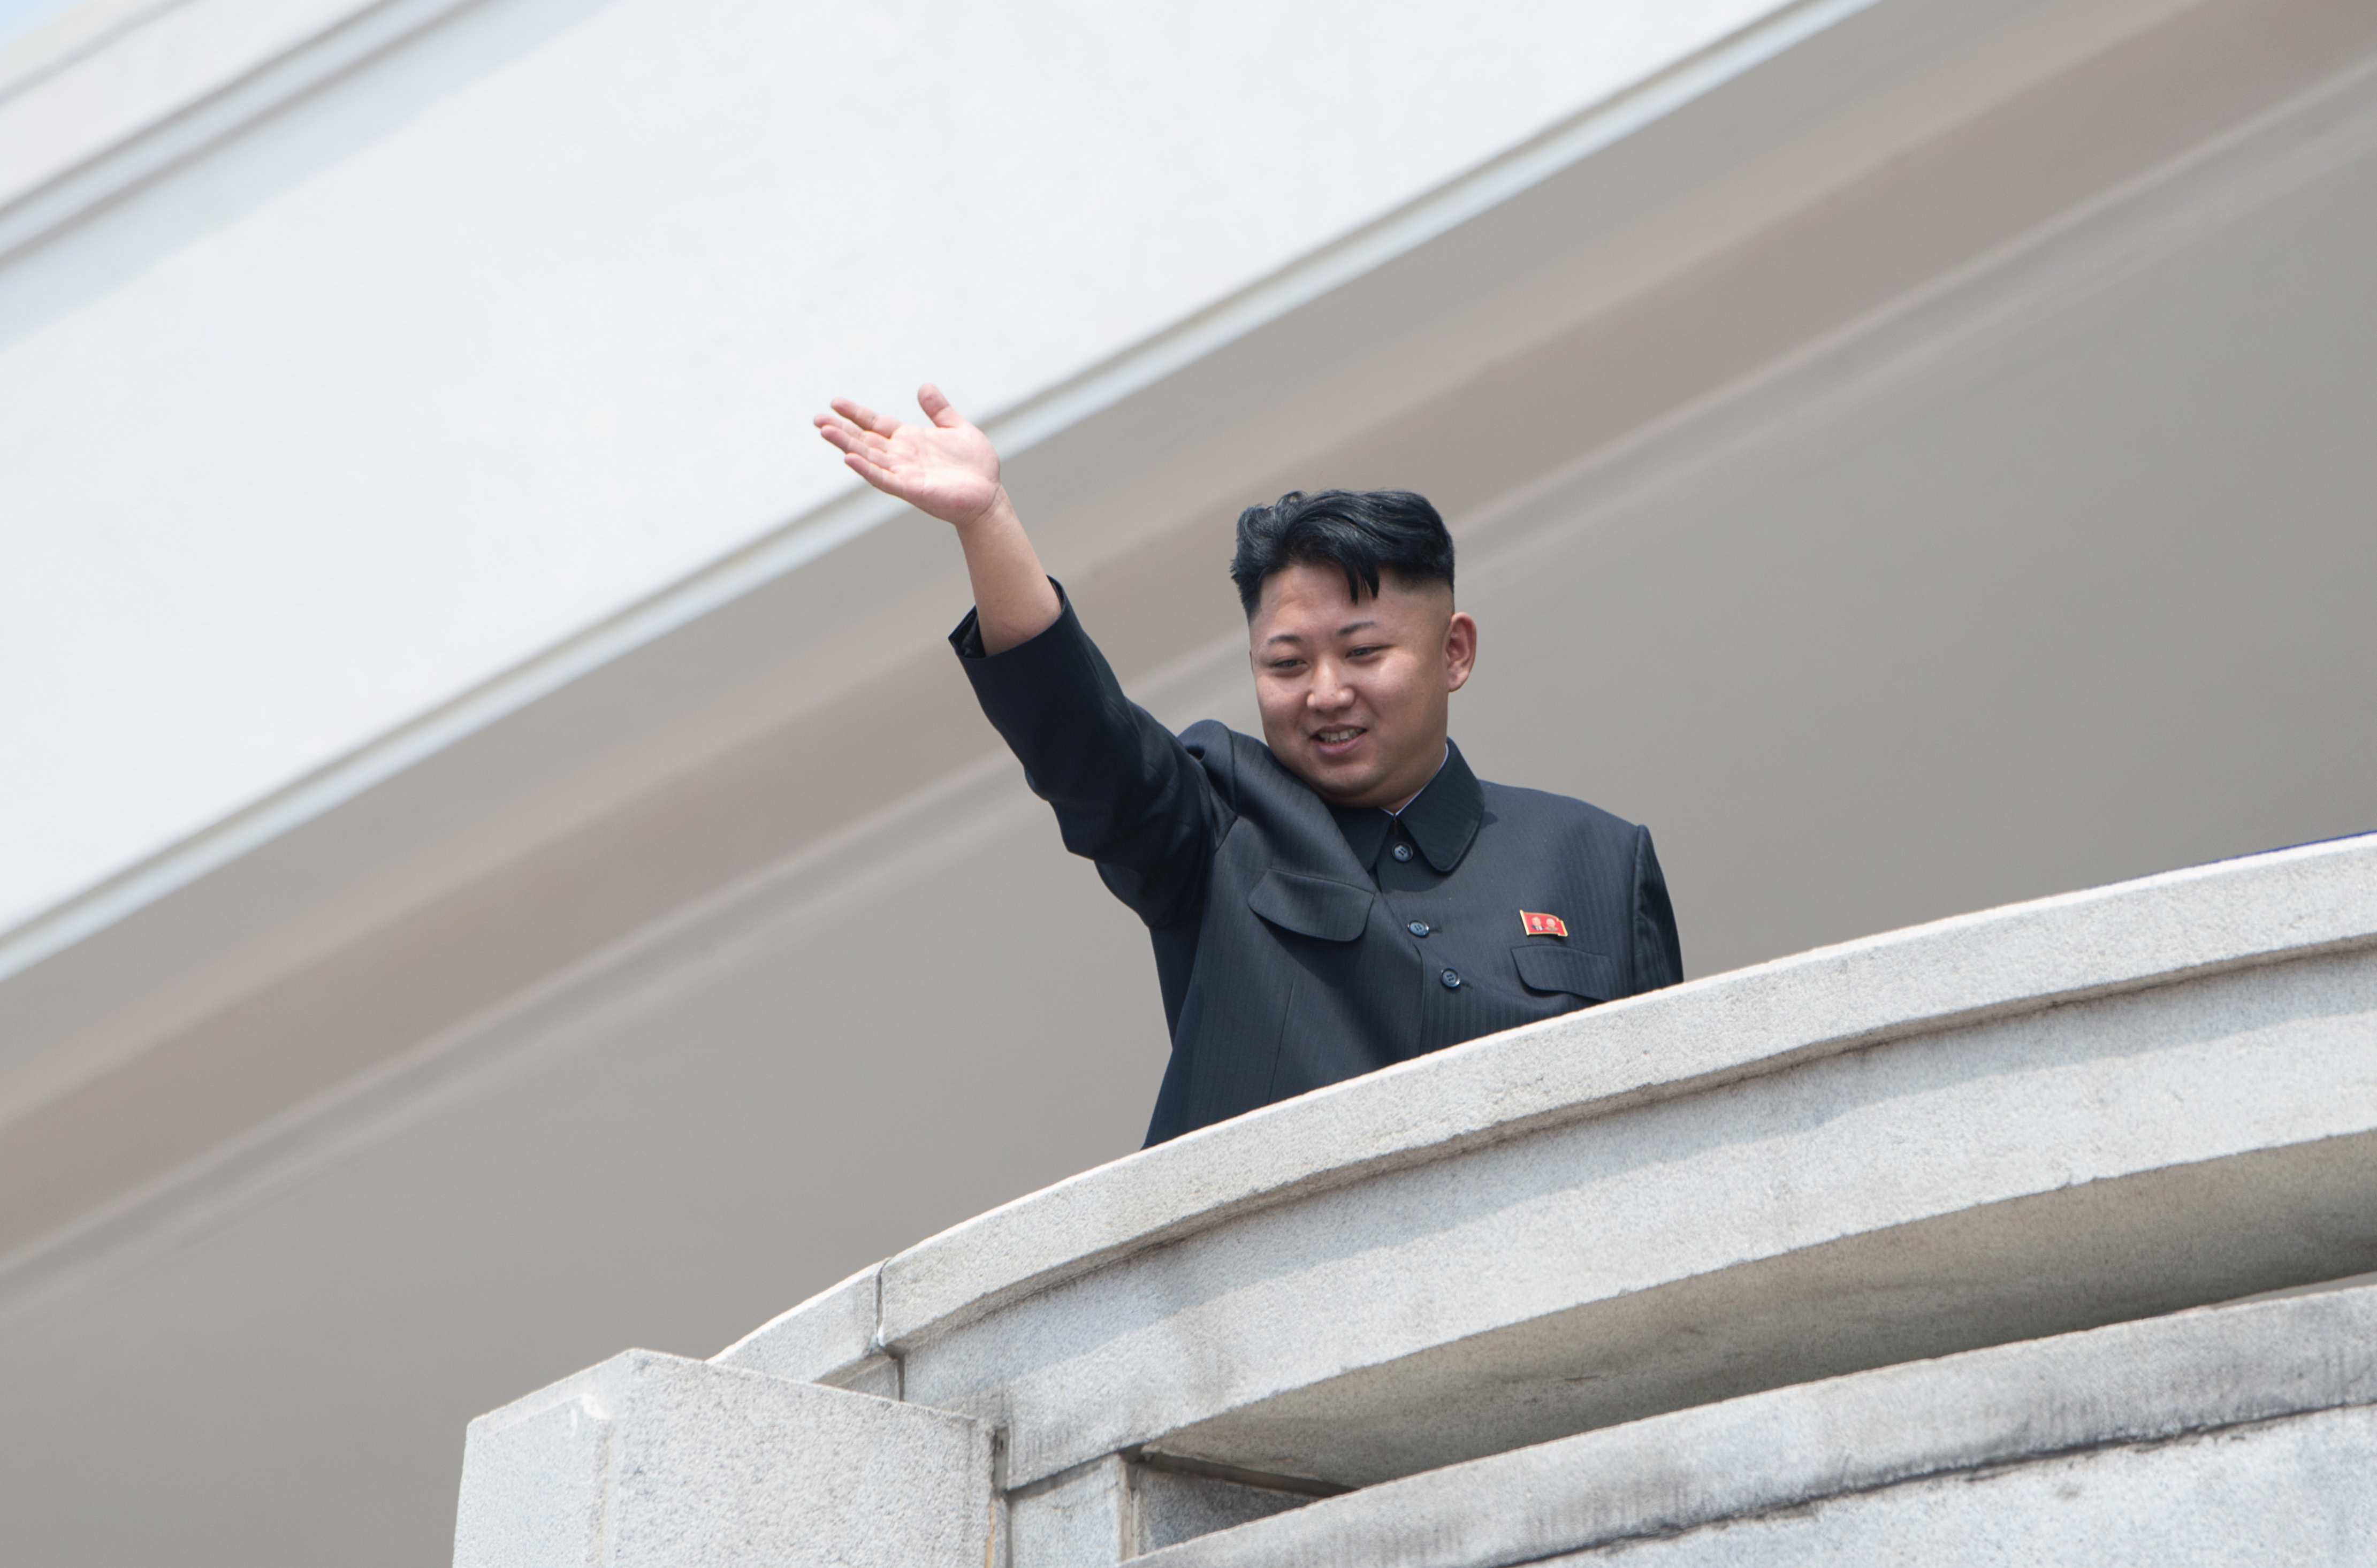 North Korean leader Kim Jong-Un waves to the crowd during a military parade at Kim Il-Sung square in Pyongyang on July 27, 2013. (Ed Jones—AFP/Getty Images)